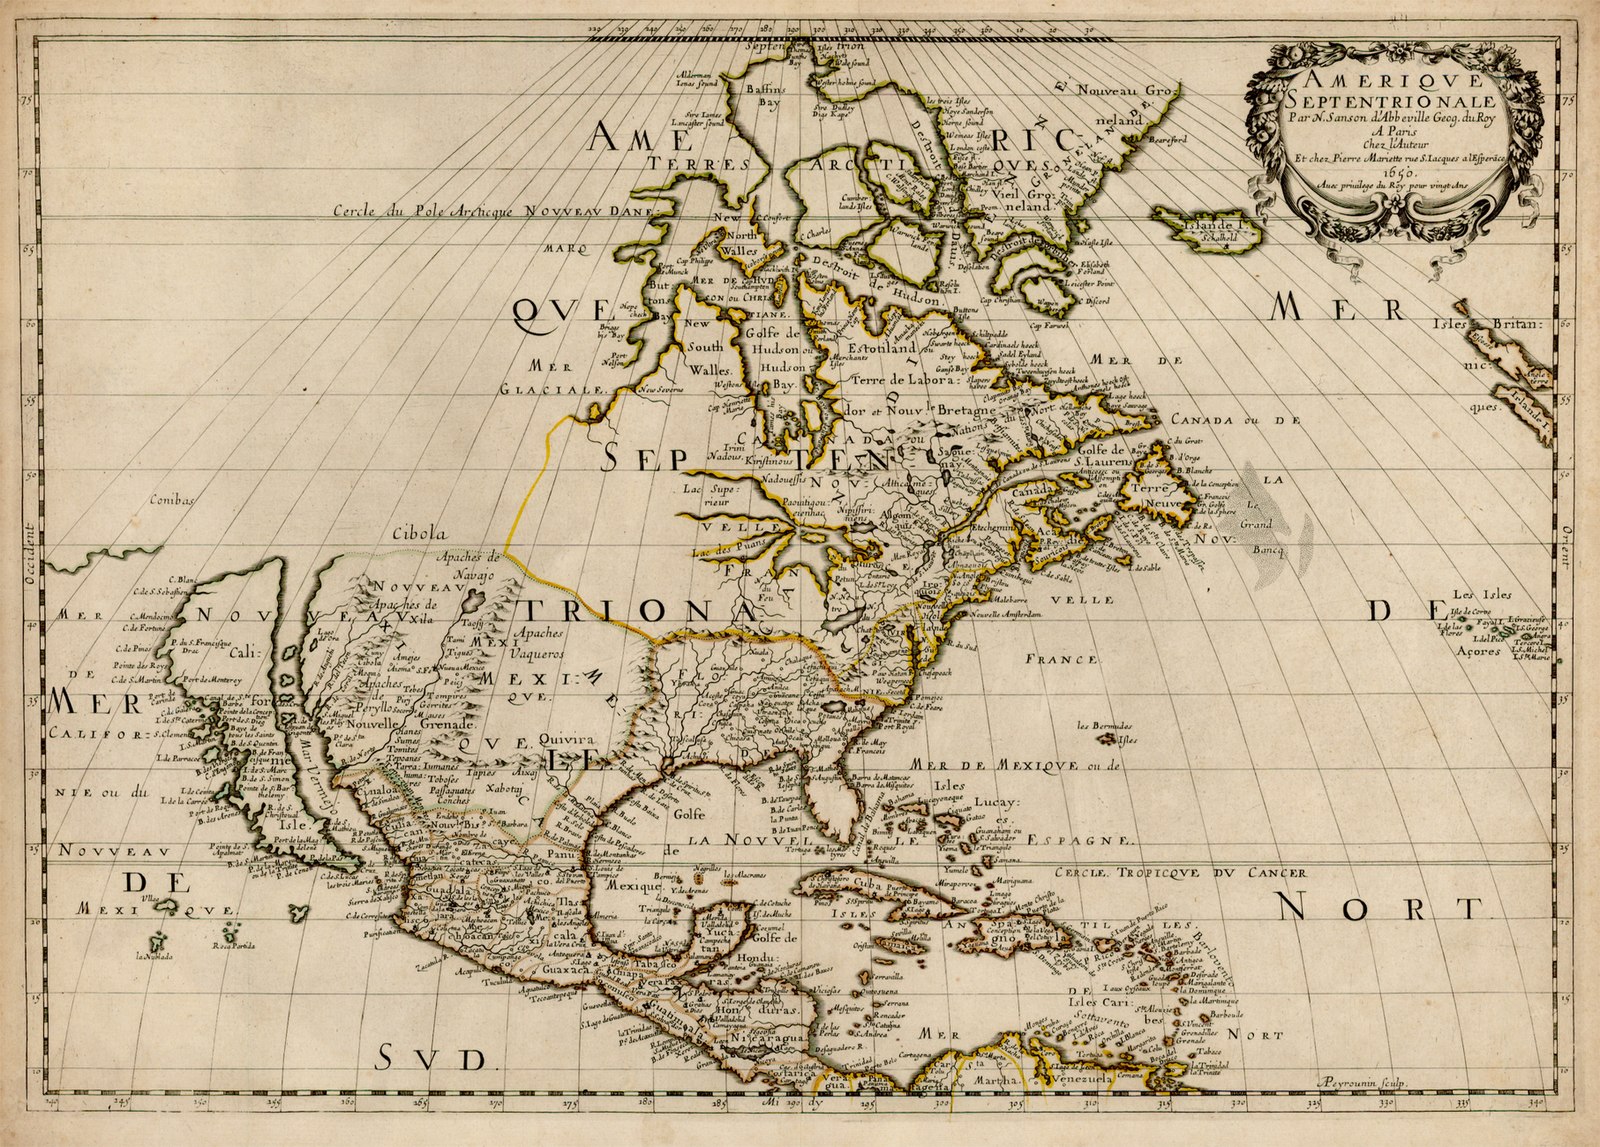 Much of New France's "Pays d'en Haut" (Upper Country) remained unexplored in the mid-1600s; Nicolas Sanson d'Abbbeville's 1650 map was the first to show all five Great Lakes.[6]